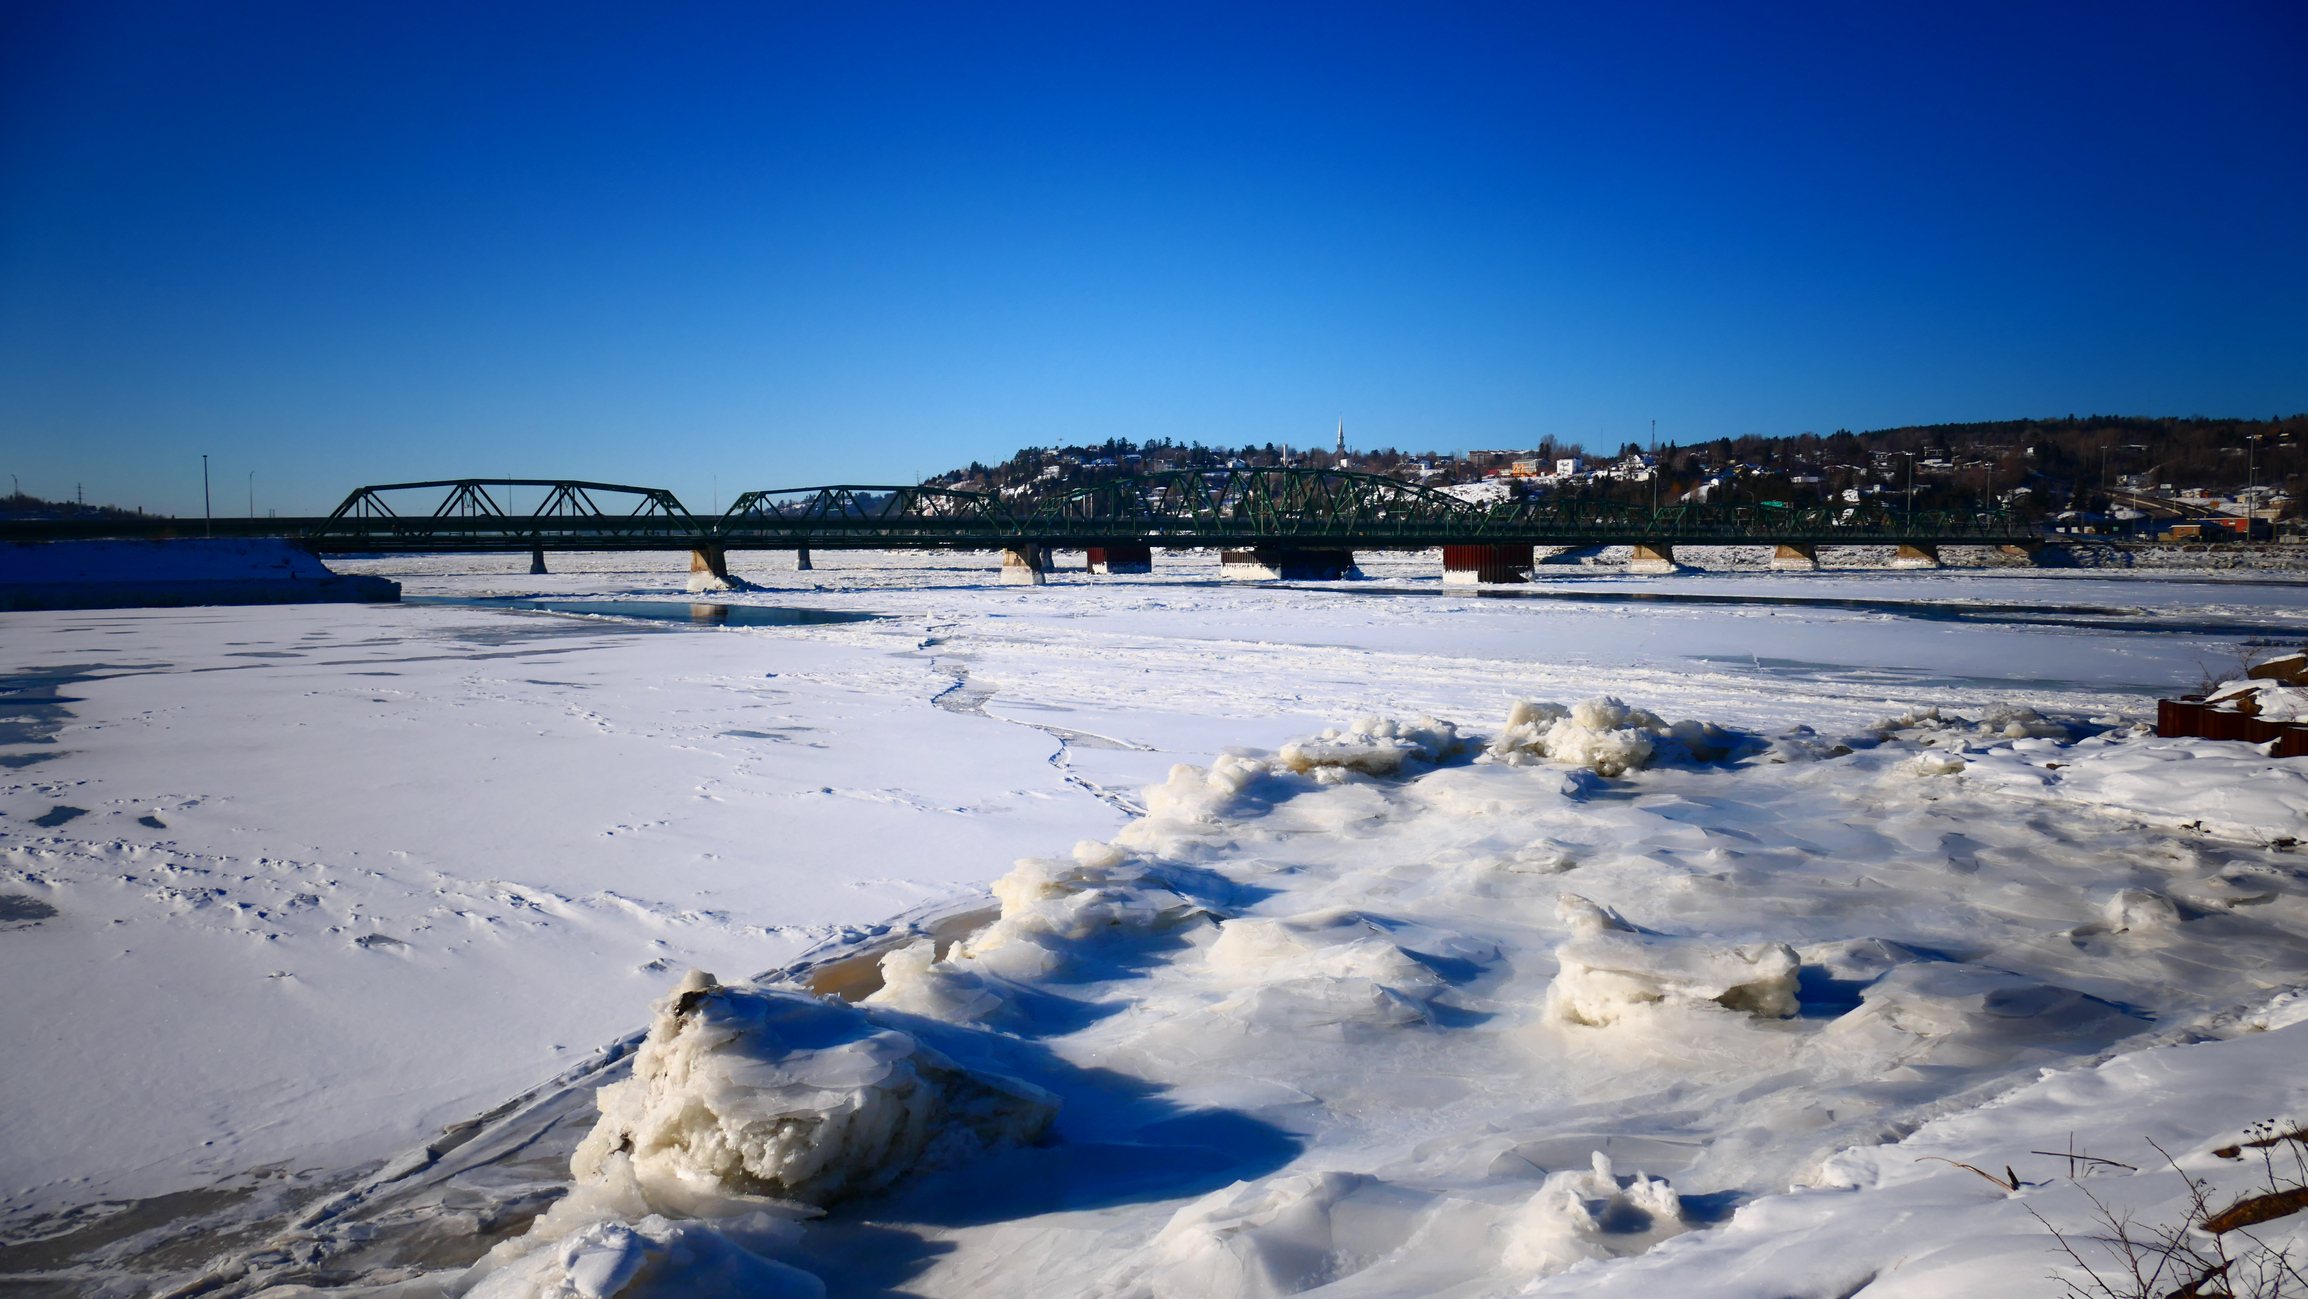 The Sainte-Anne Bridge in Chicoutimi, Saguenay, QC, on a bright winter's day, with the Saguenay river mostly frozen over.